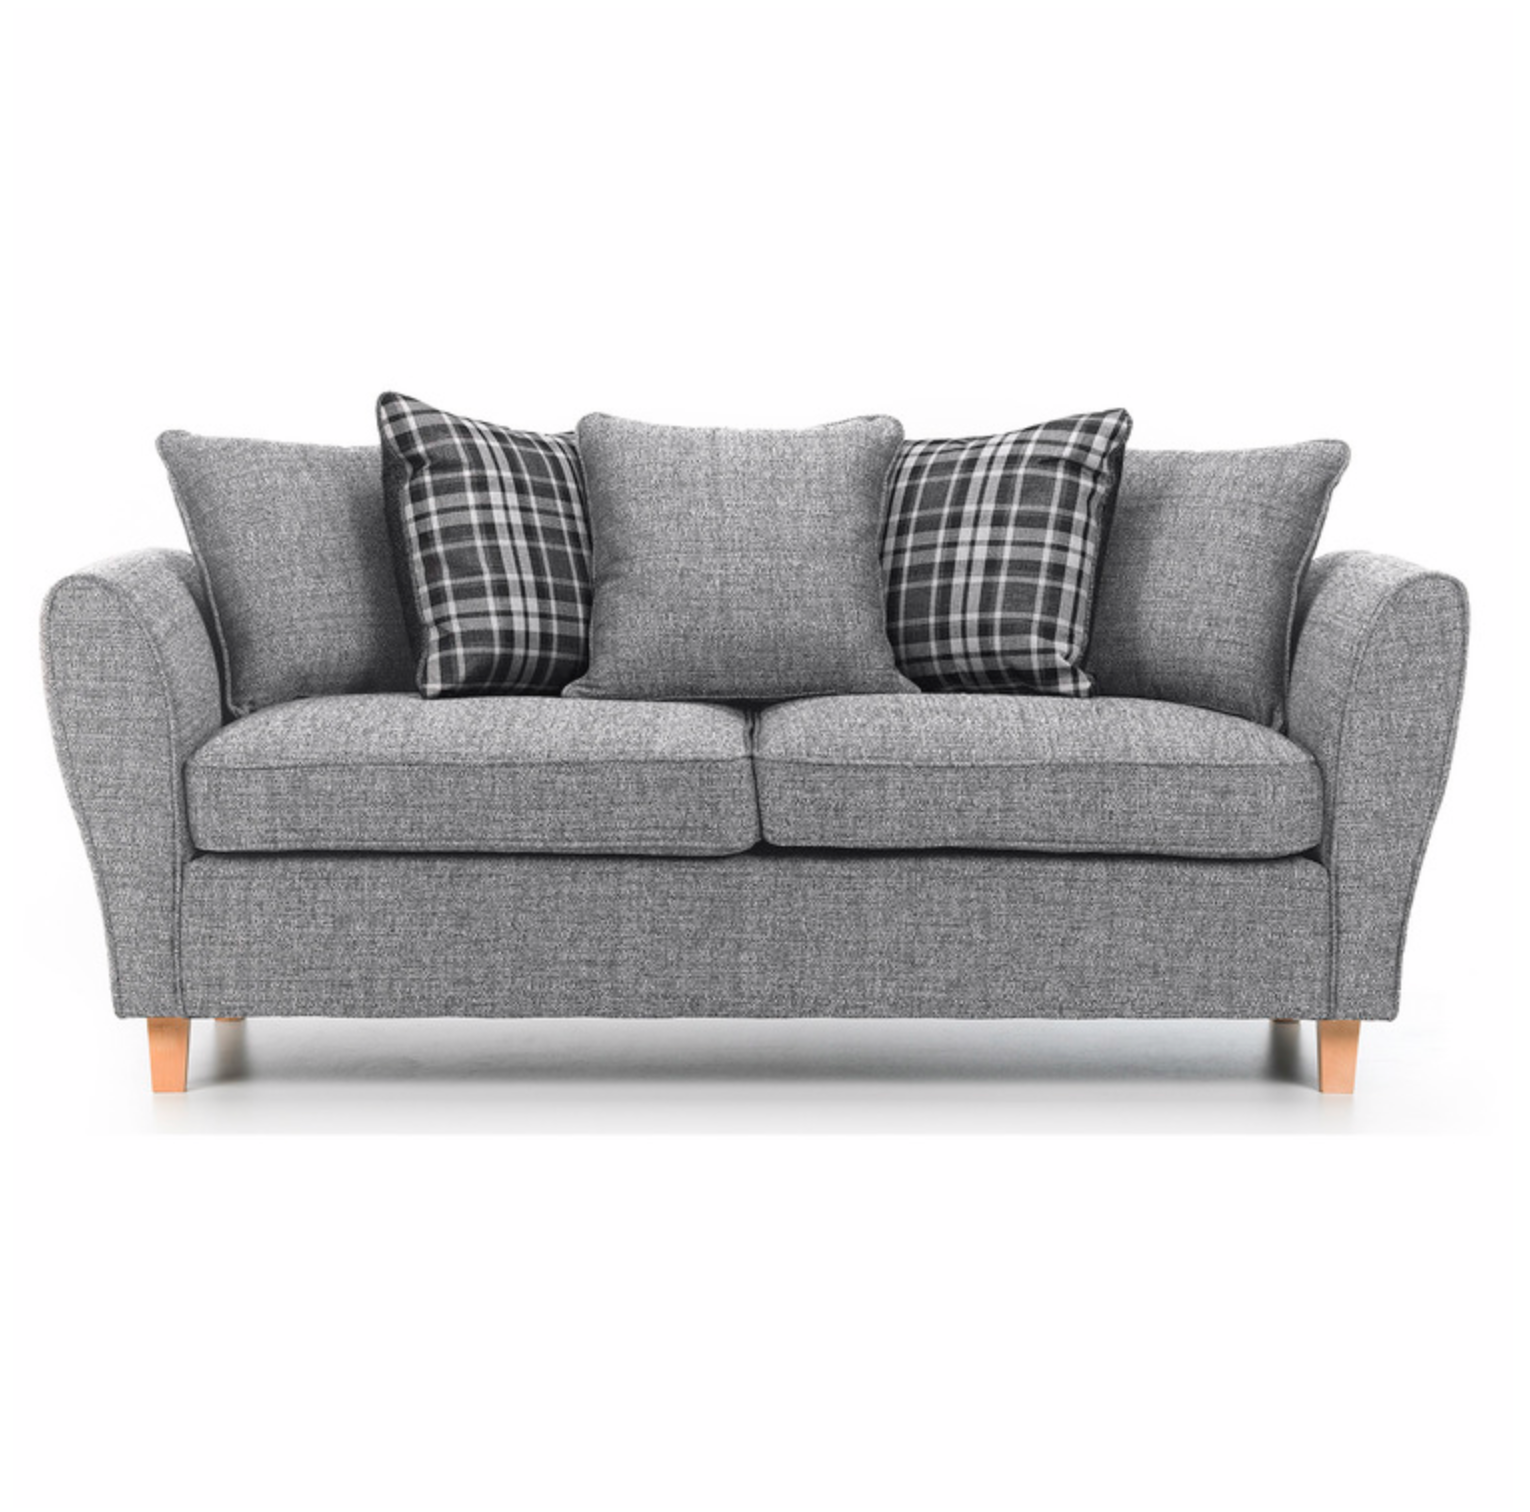 Chilton 3 Seater Sofa Scatter Back Cushions Grey Check